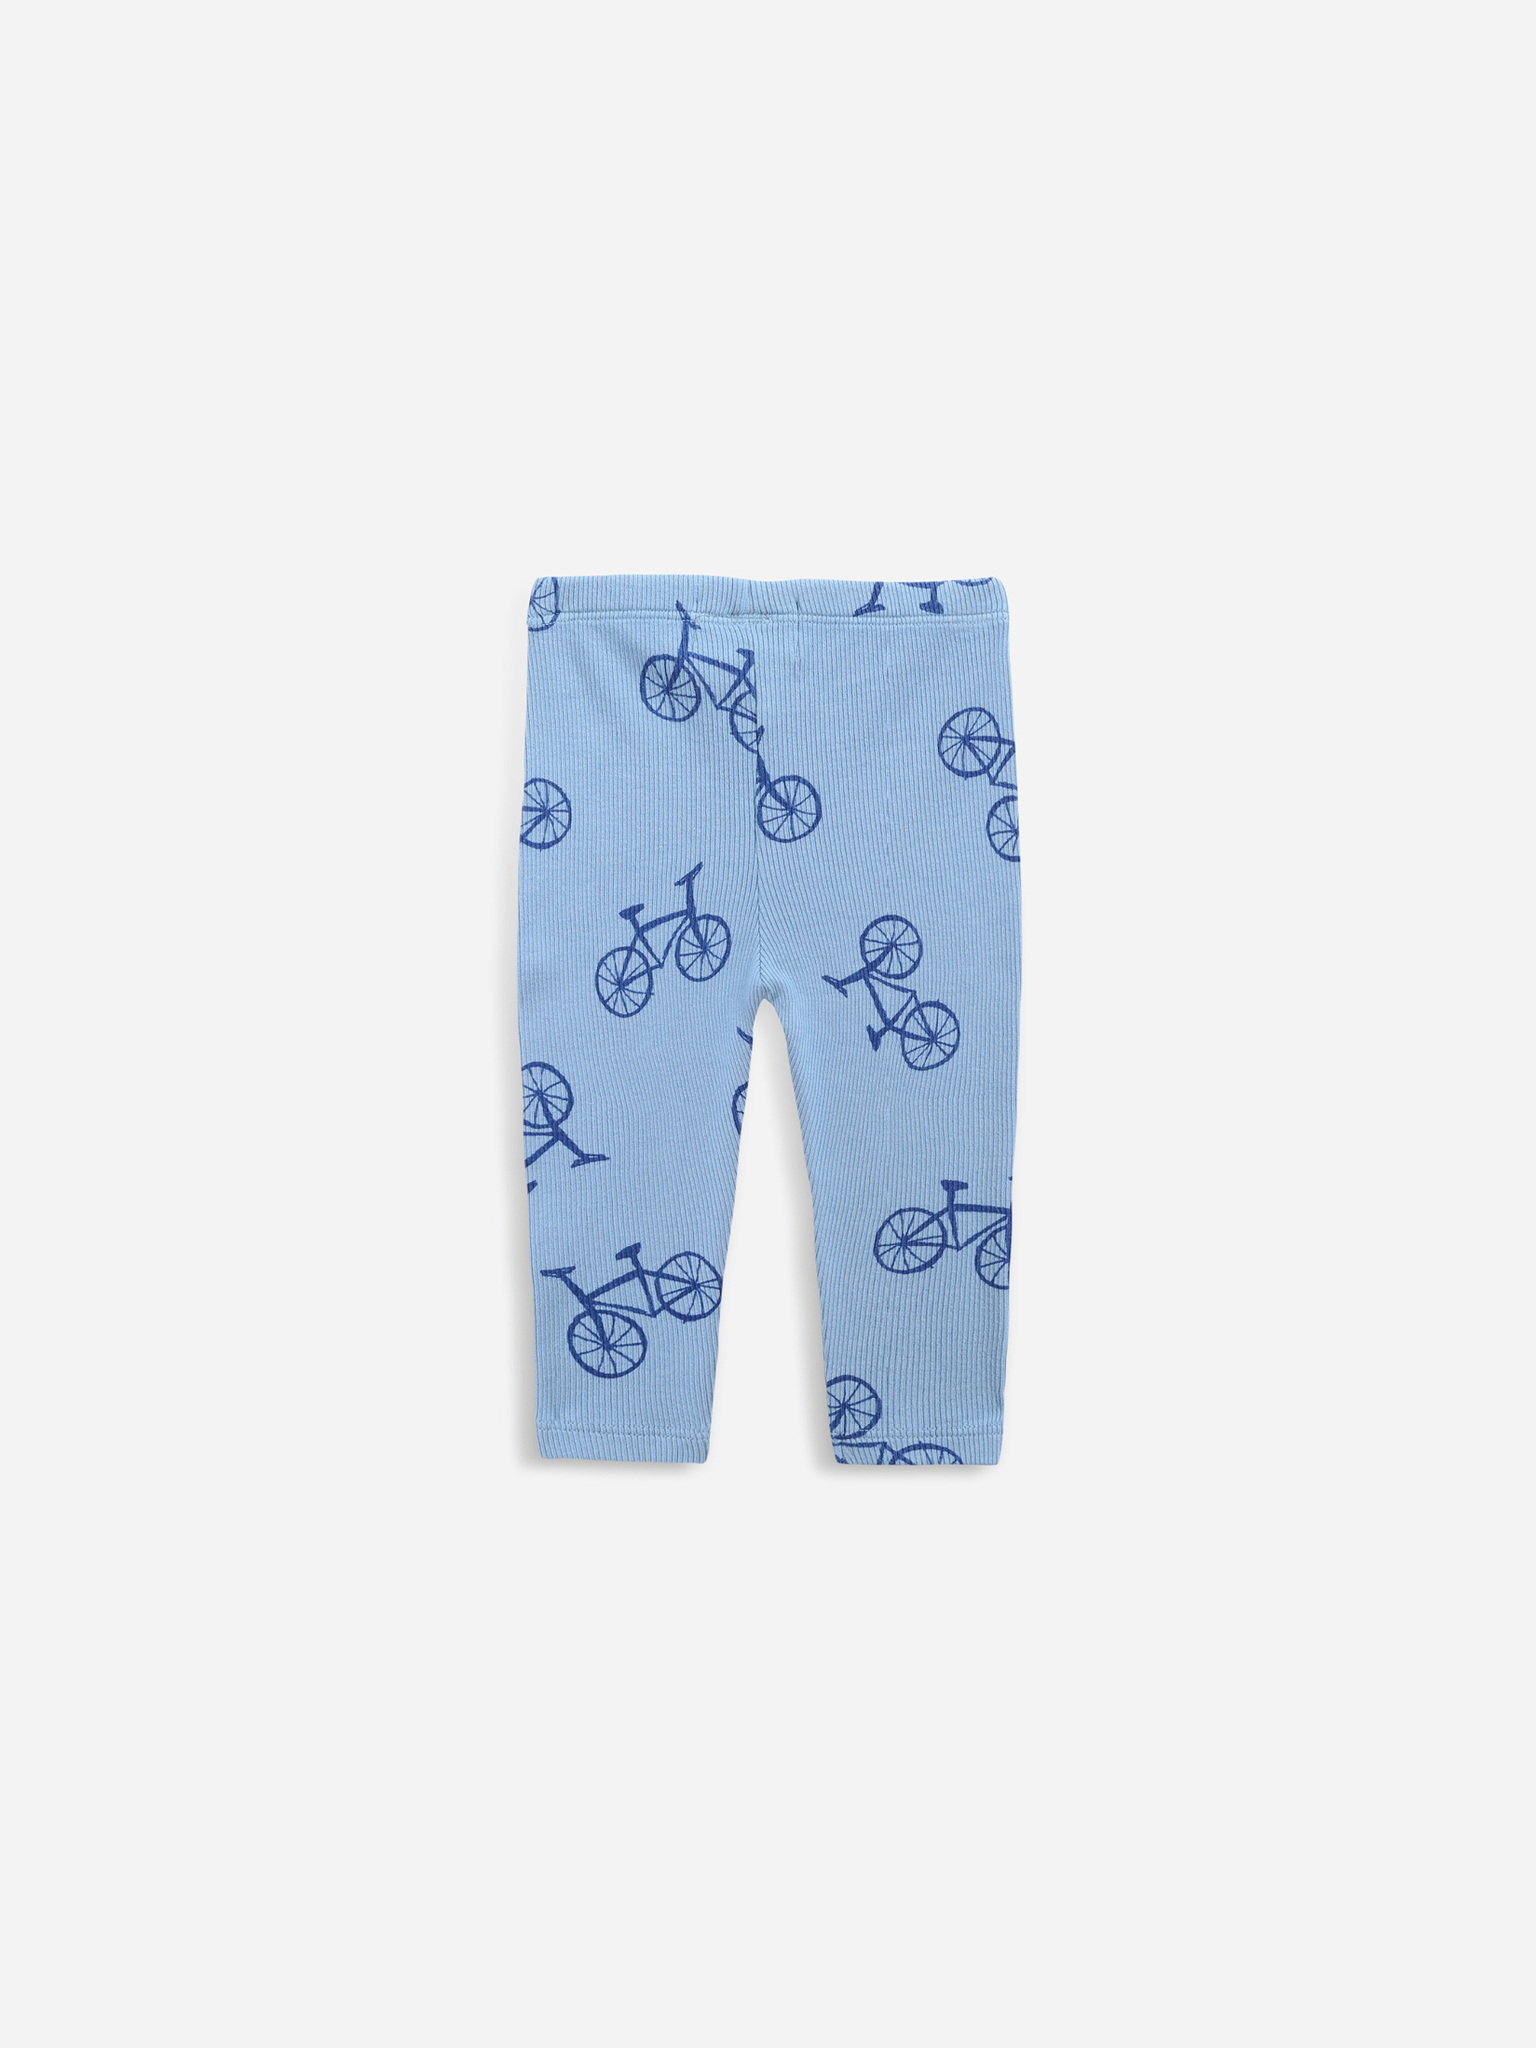 Bobo Choses Bicycle All Over Leggings